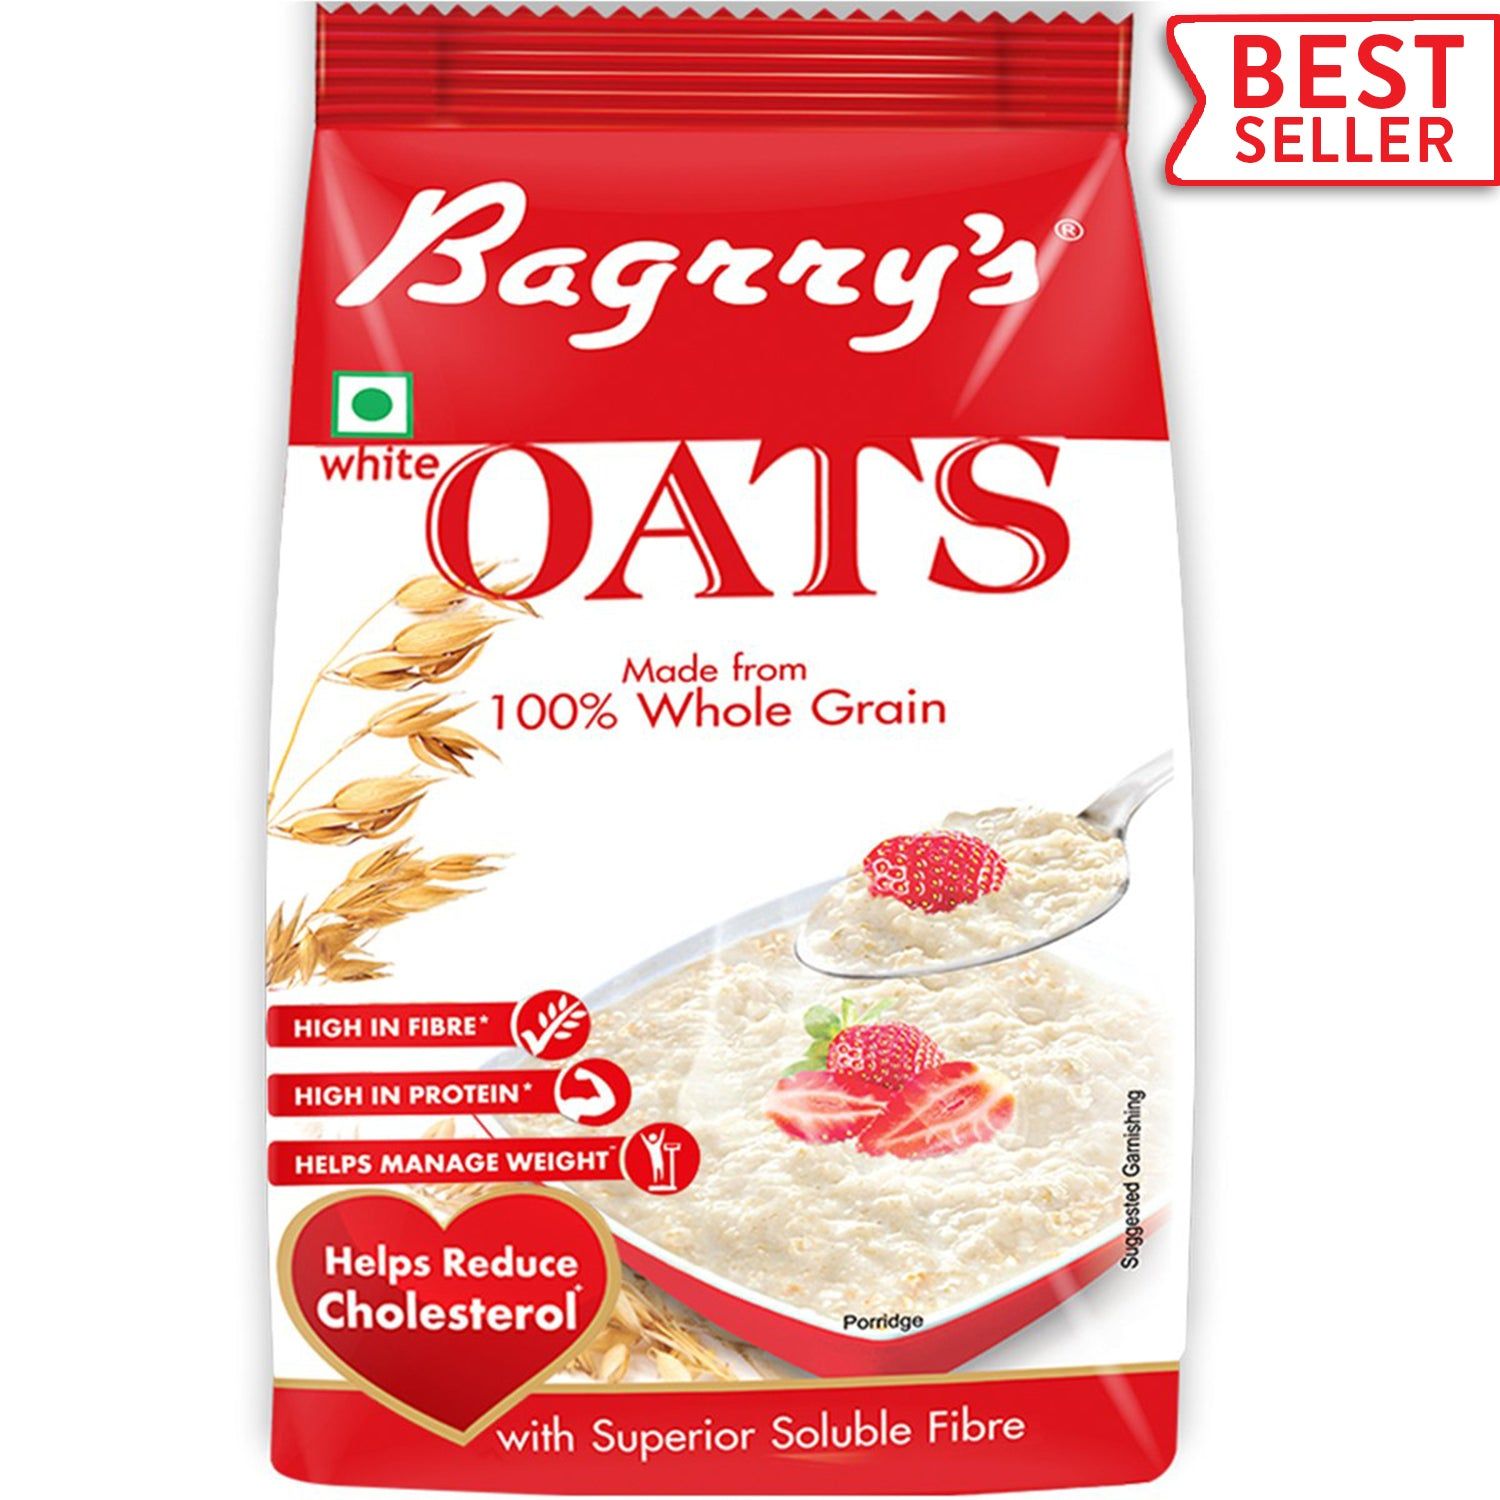 Bagrry's White Oats Made From 100% Whole Grain Image